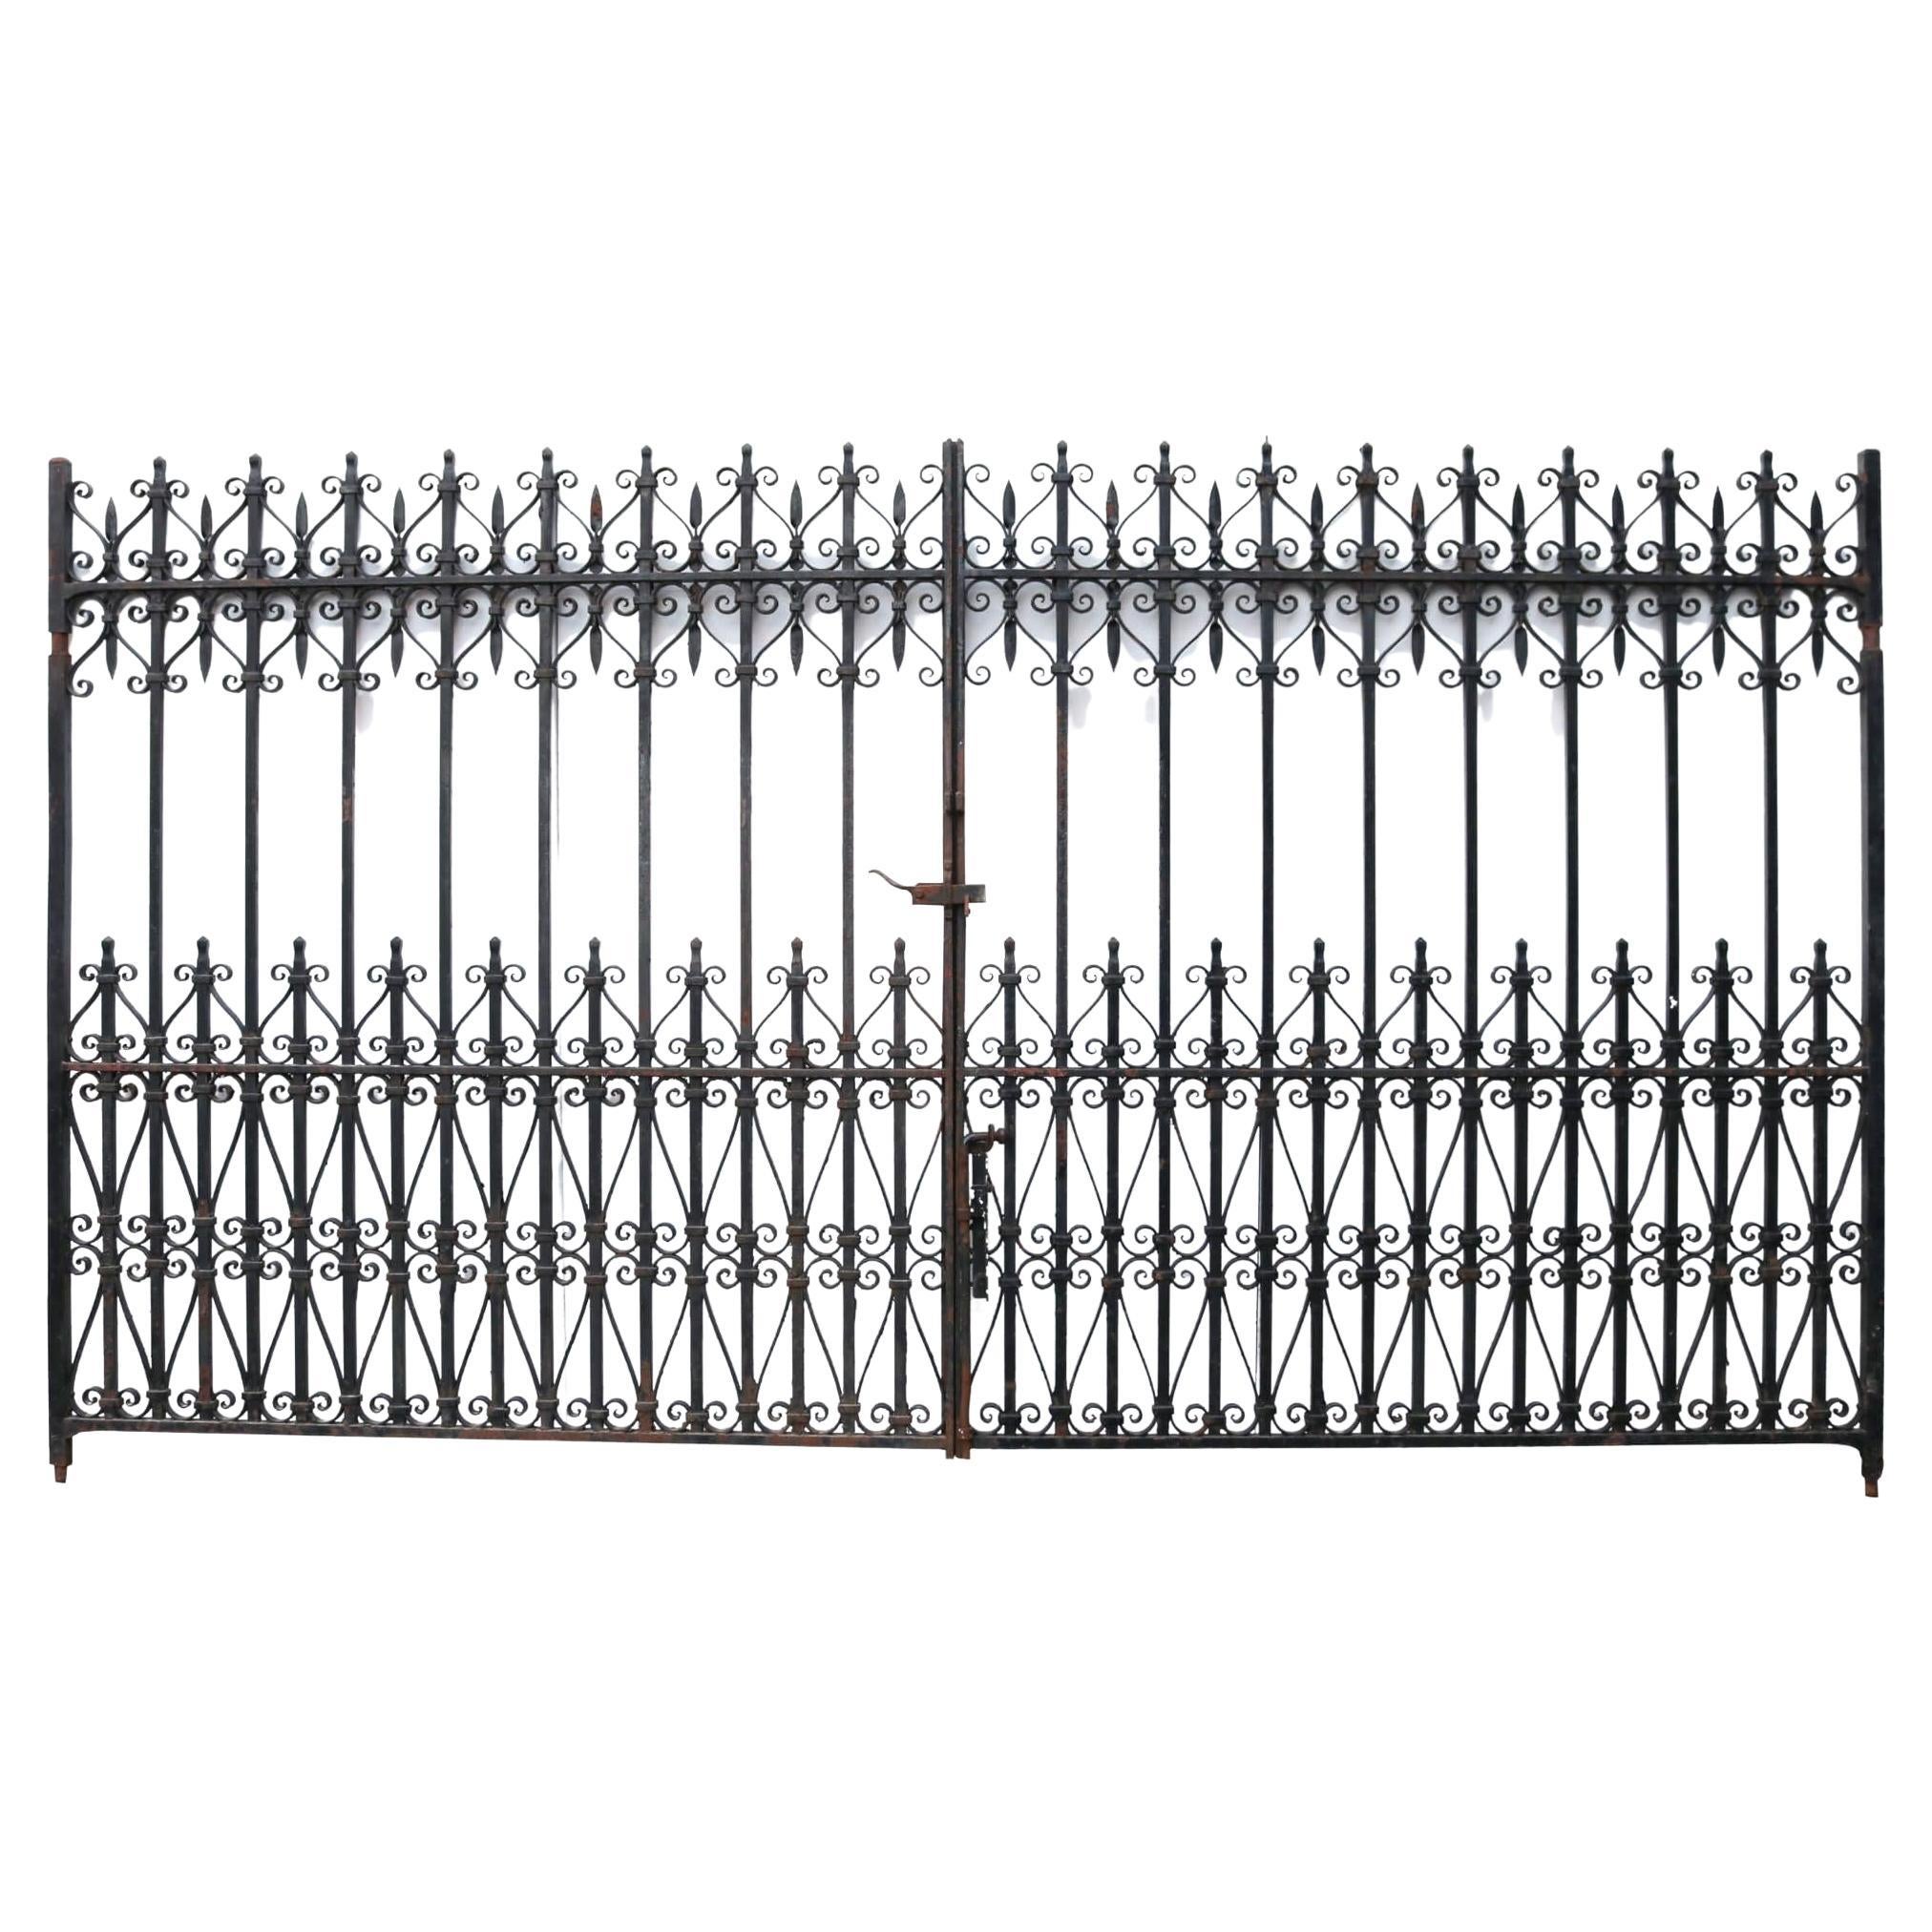 Ornate Pair of Driveway Gates in Wrought Iron 318 cm (10’4″)